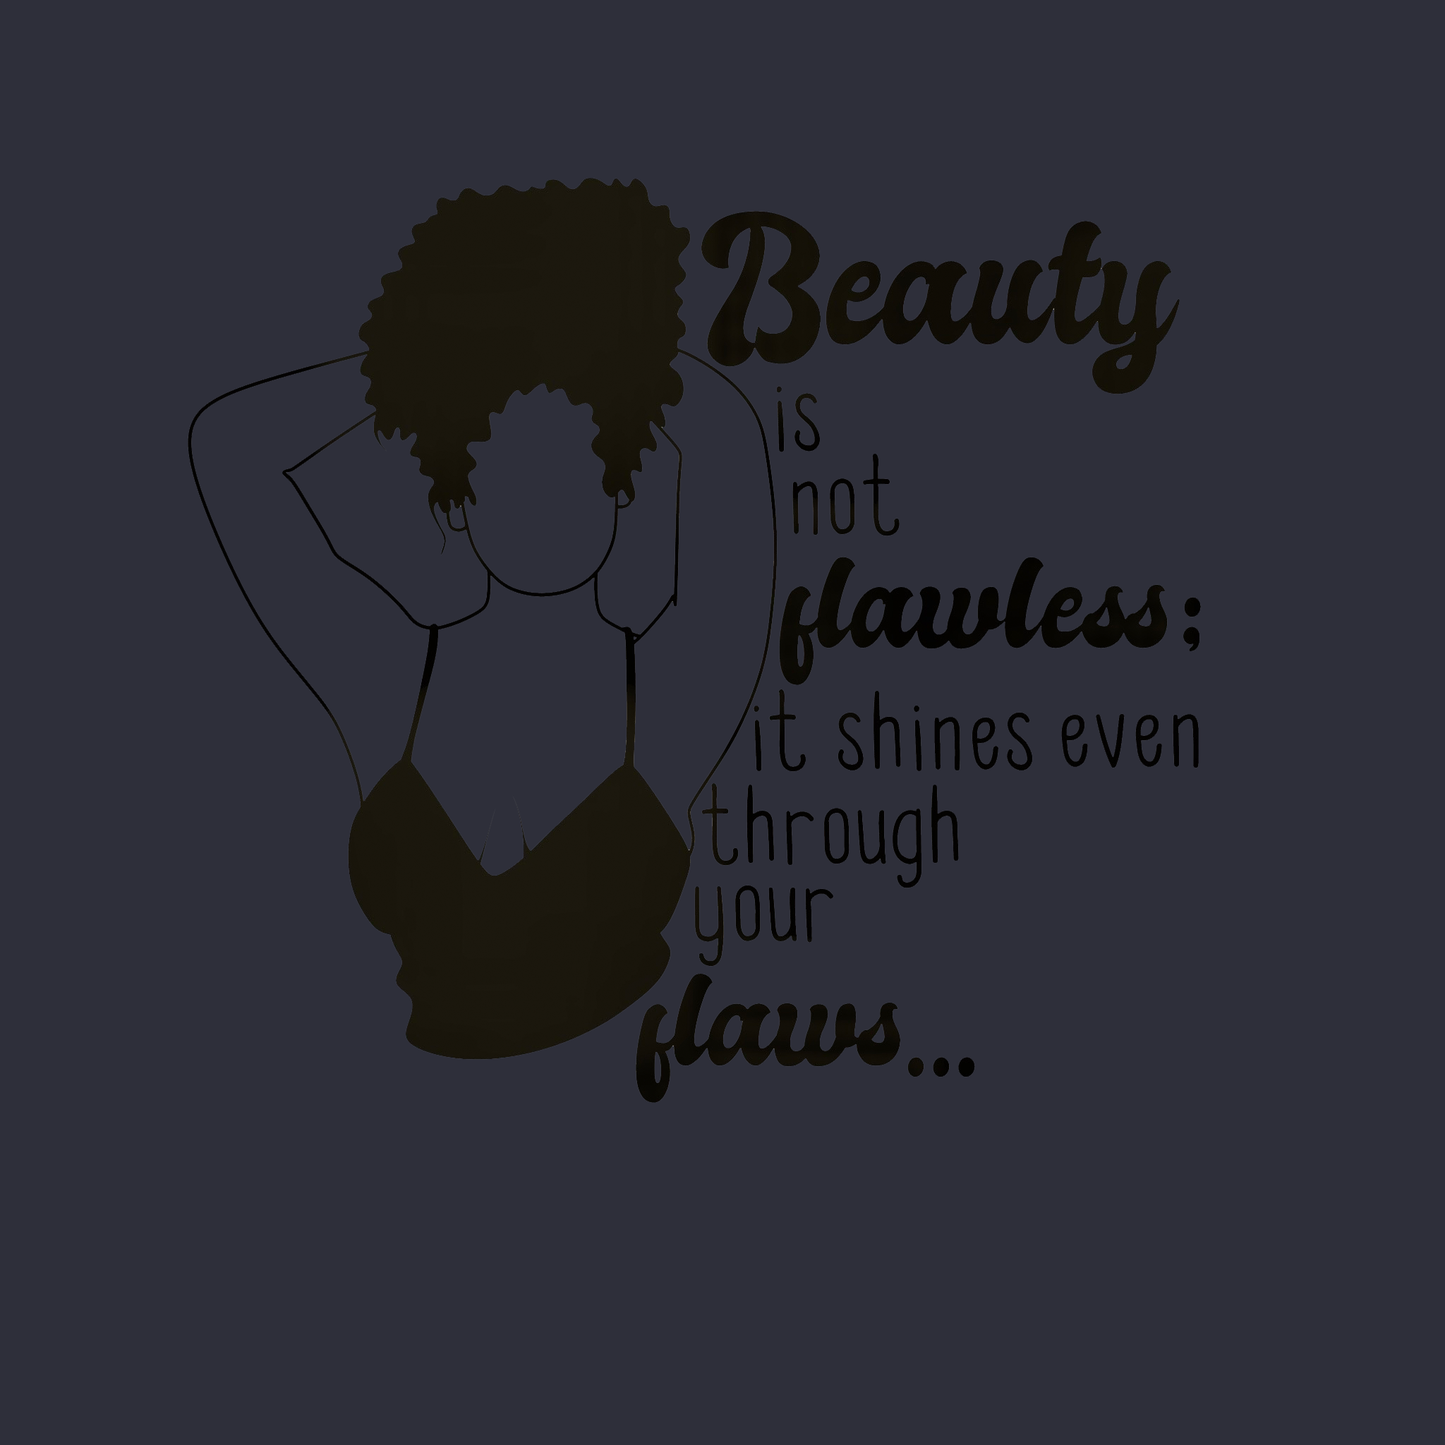 "Beauty is Flawless" unapologetically black tee